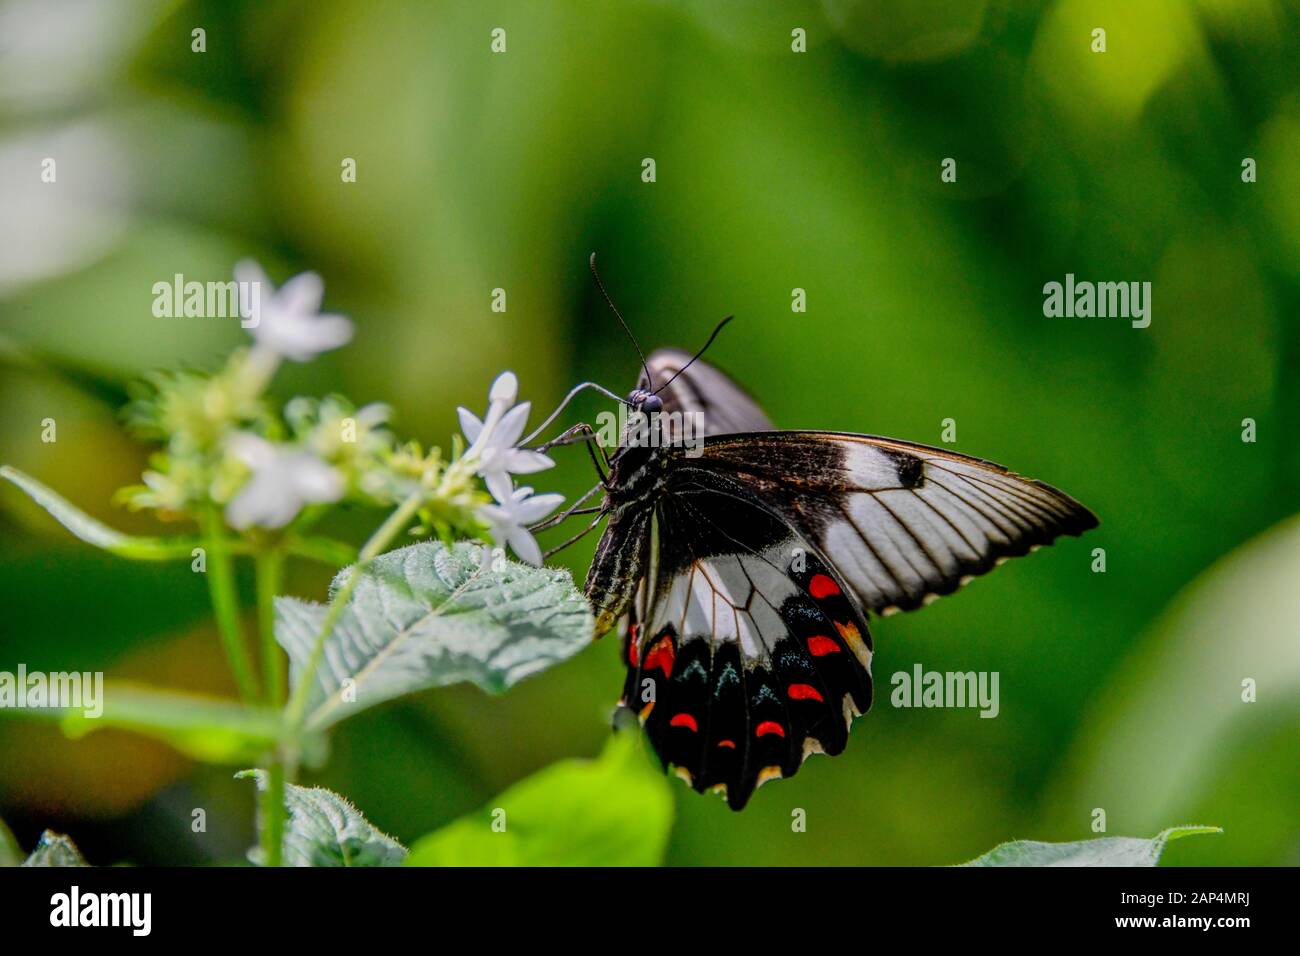 A Orchid Swollowtail Black White Red Blue Butterfly - Papilo Aegeus resting on top of White Flowers and Green Leaves in Garden Sun closeup Stock Photo